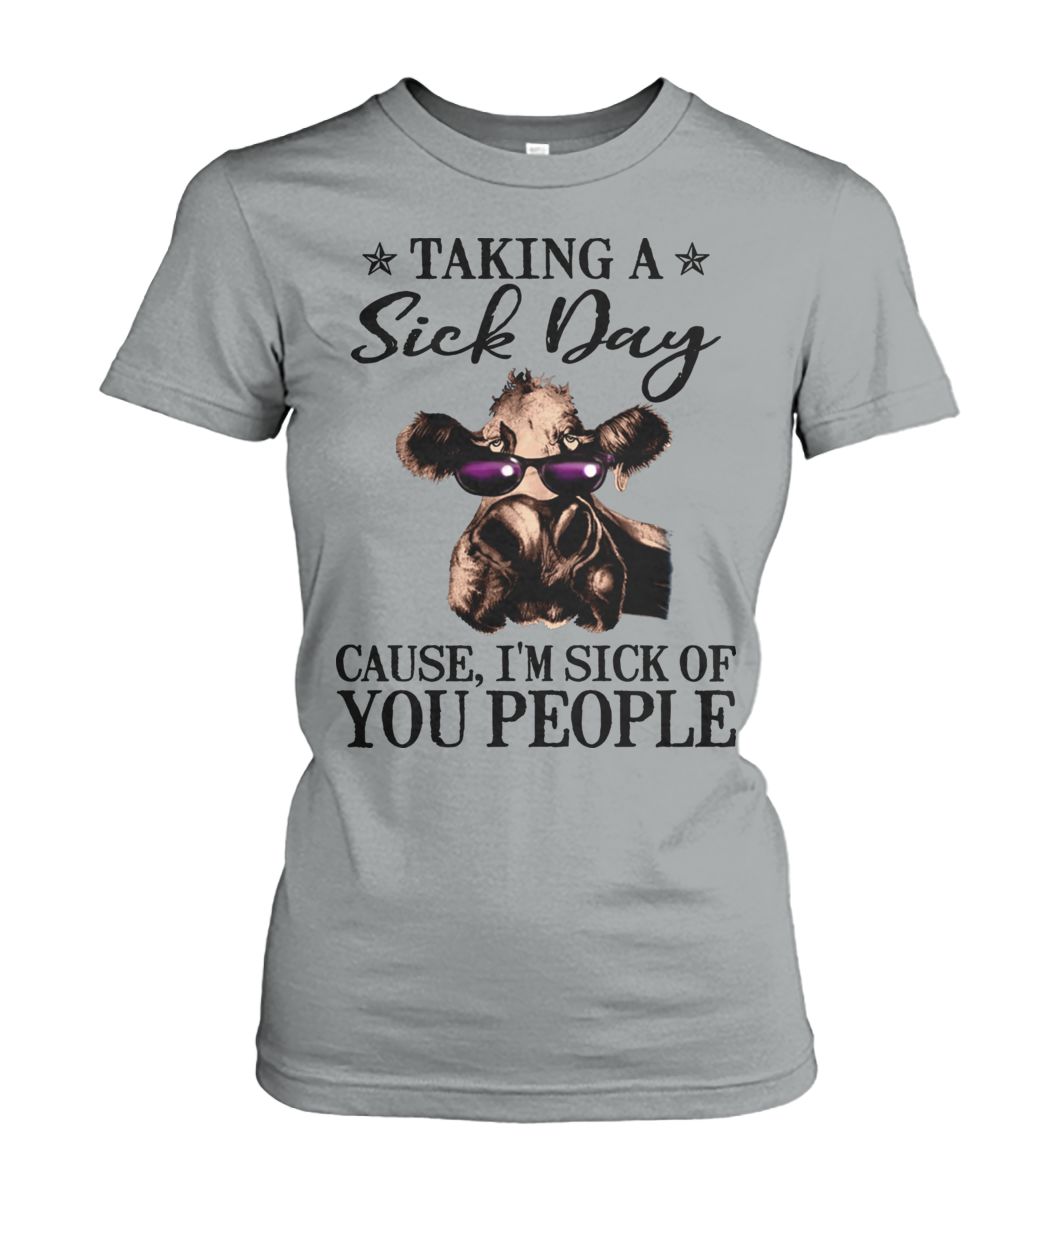 Heifer taking a sick day cause I'm sick of you people women's crew tee